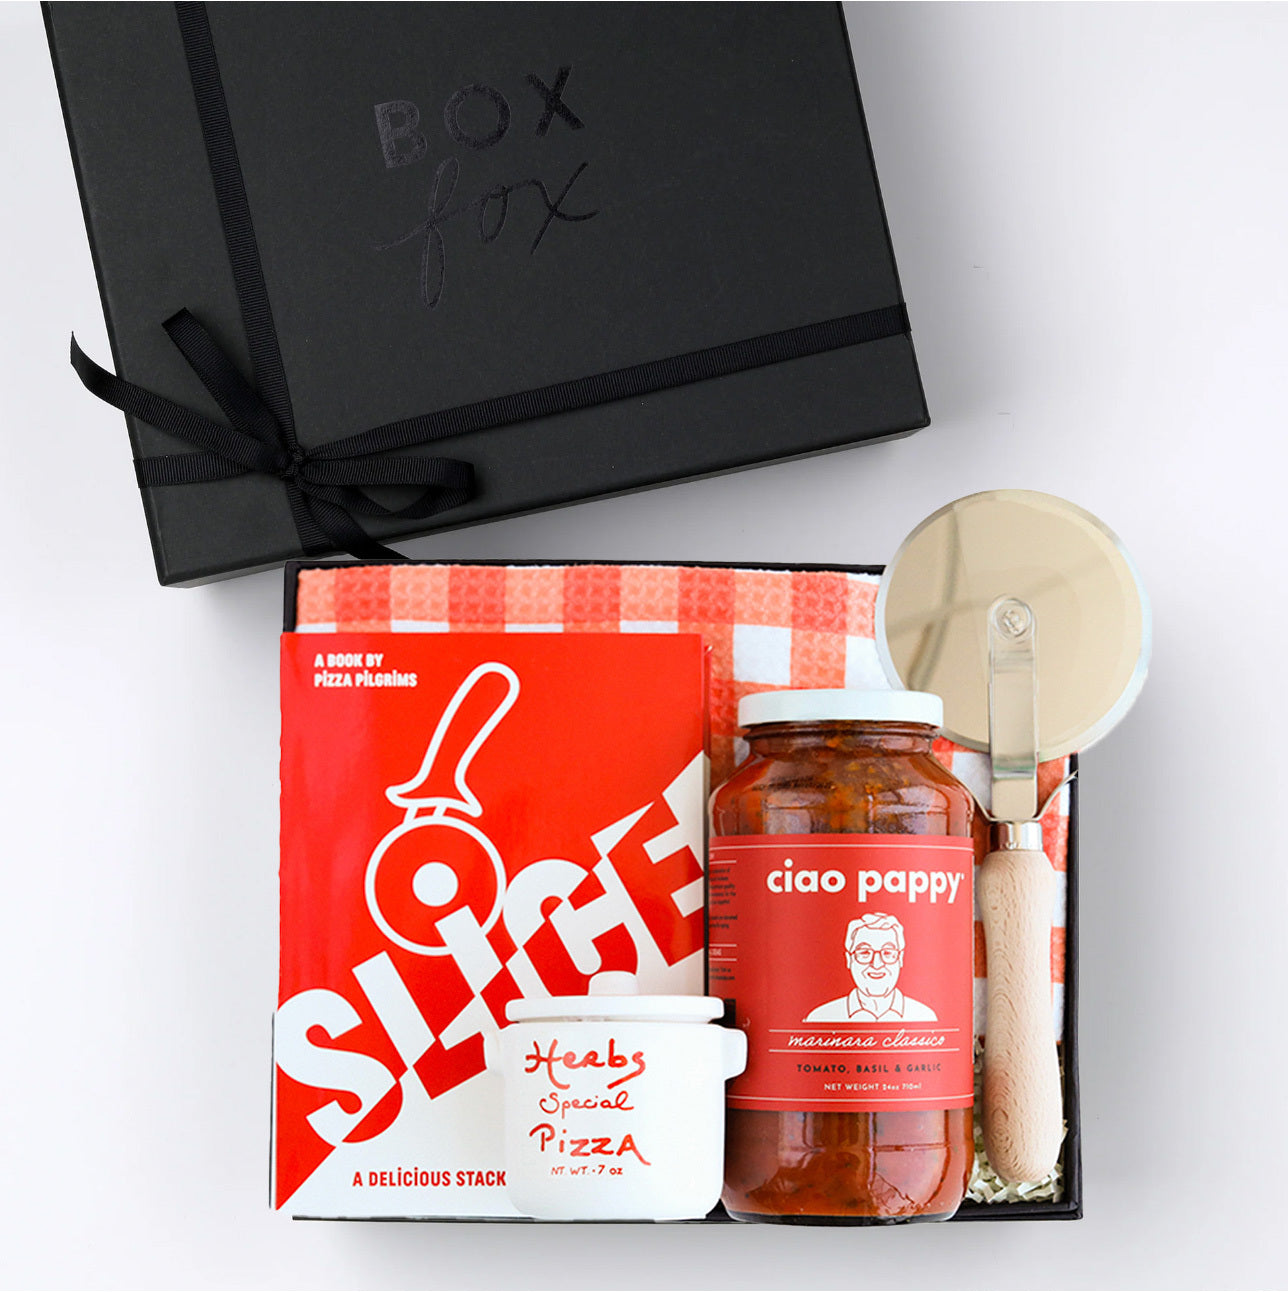 BOXFOX Black gift box packed with "Slice" Pizza book, wood pizza cutter, Ciao Pappy Marinara sauce, Pizza herbs jar and plaid red Geometry tea towel.